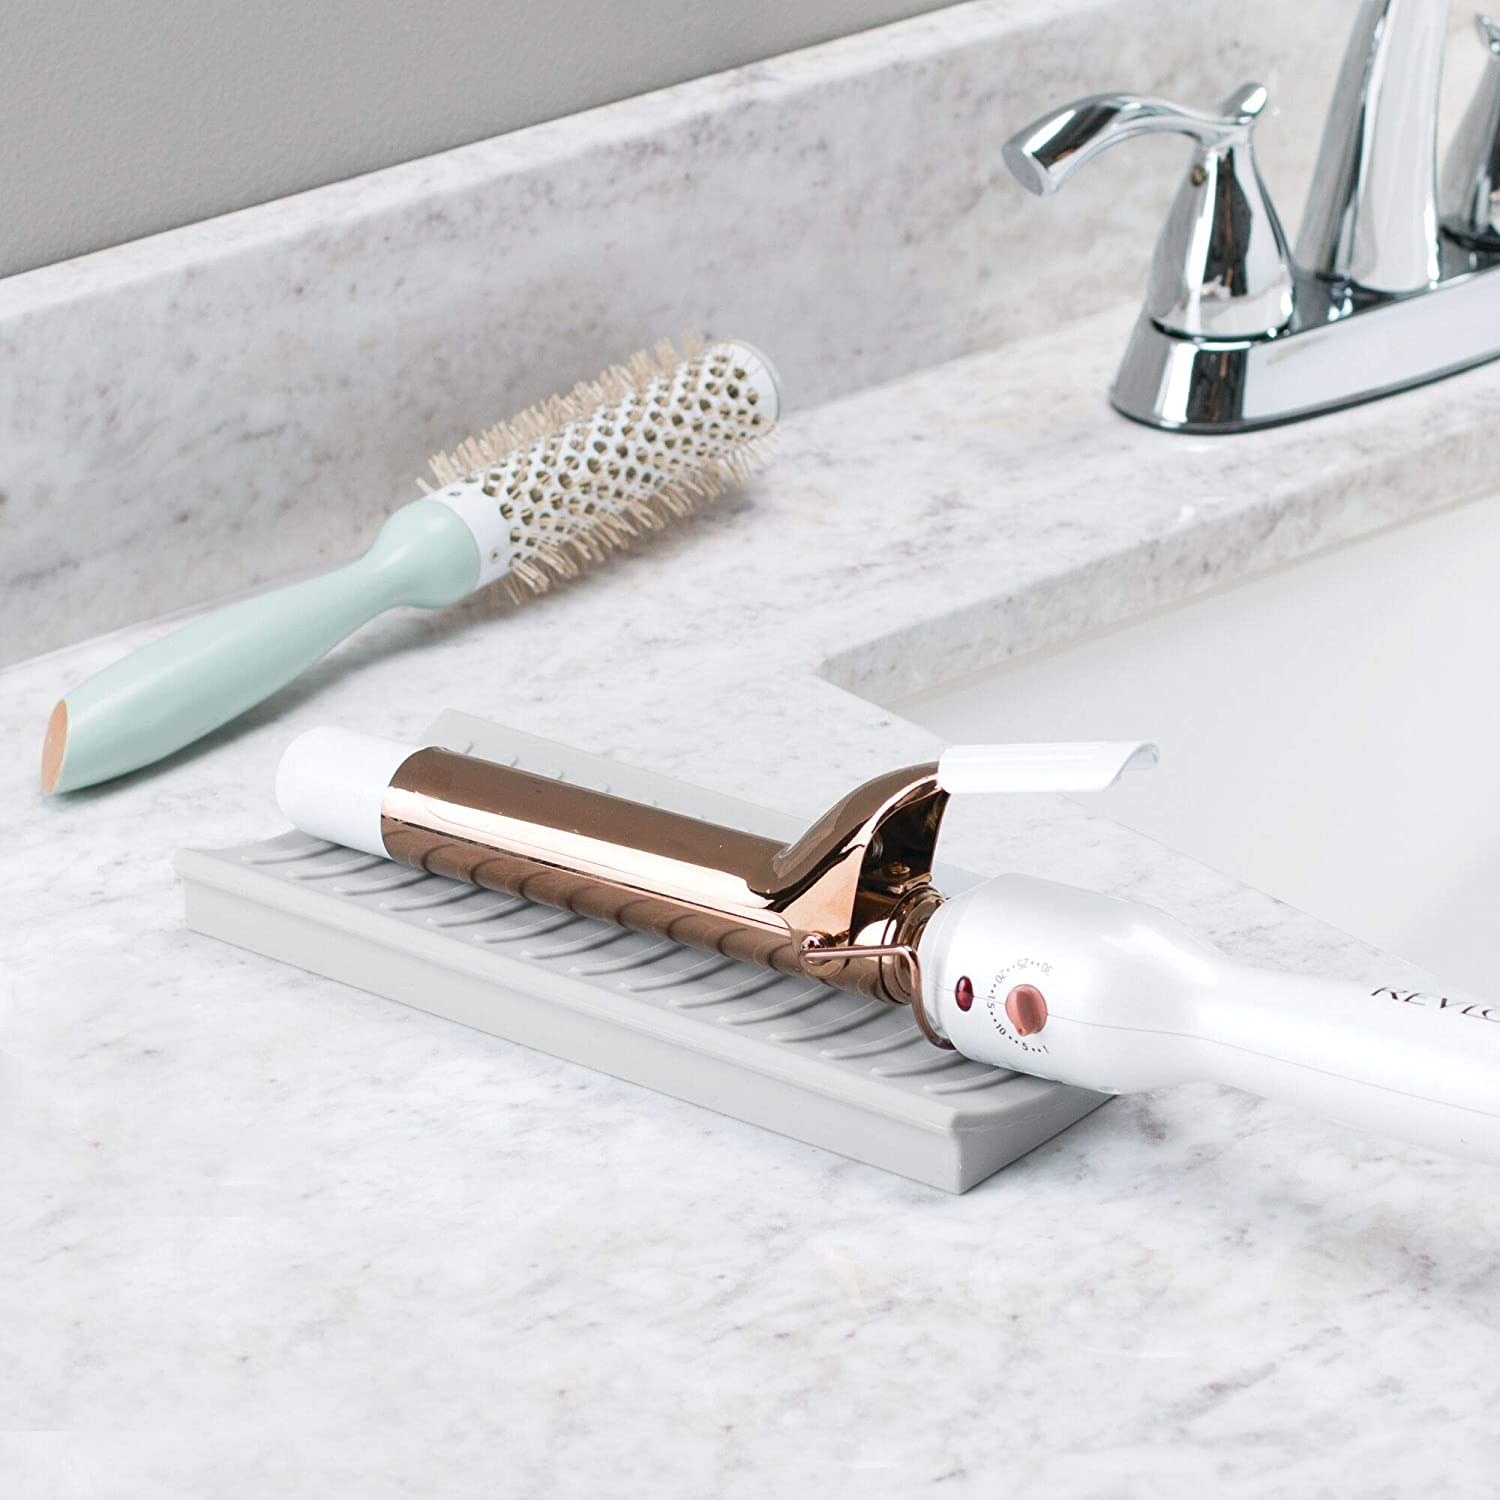 A curling iron resting on a small silicone at on a bathroom counter